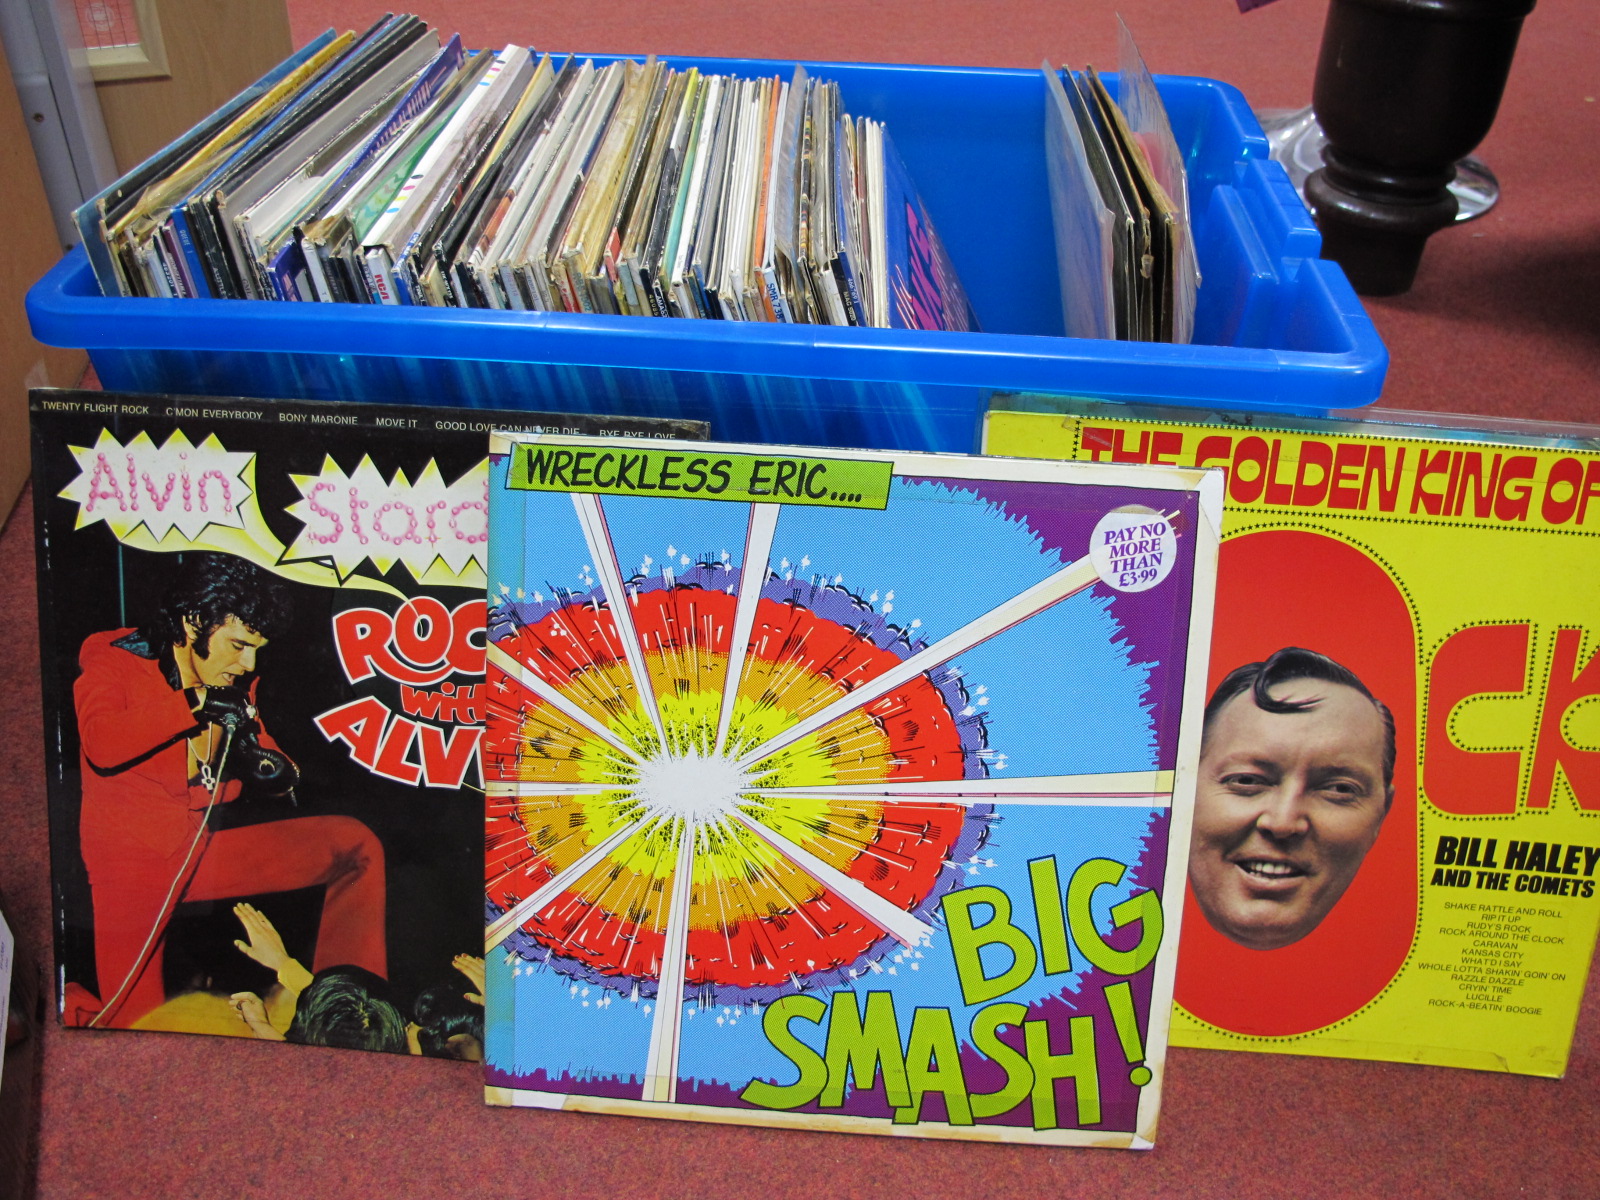 A Mixed Collection of L.P's many 1980's Pop Genre, including Status Quo, Tina Turner, Whitney